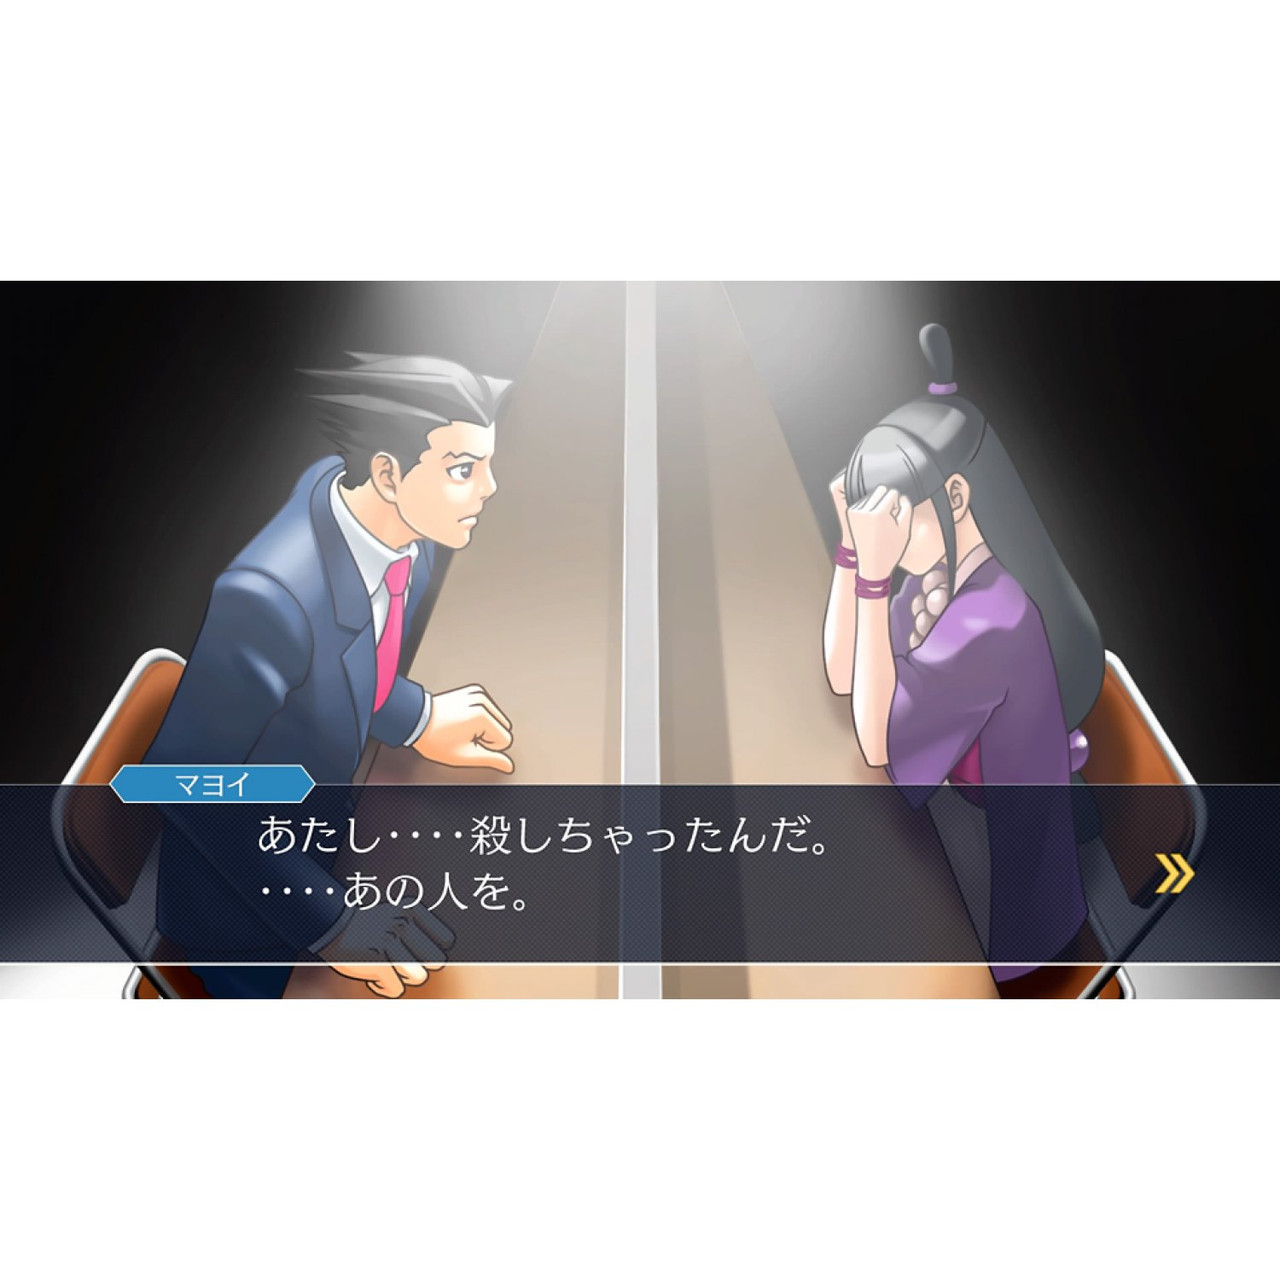 Phoenix Wright Ace Attorney 123 Switch Naruhodo Selection Game